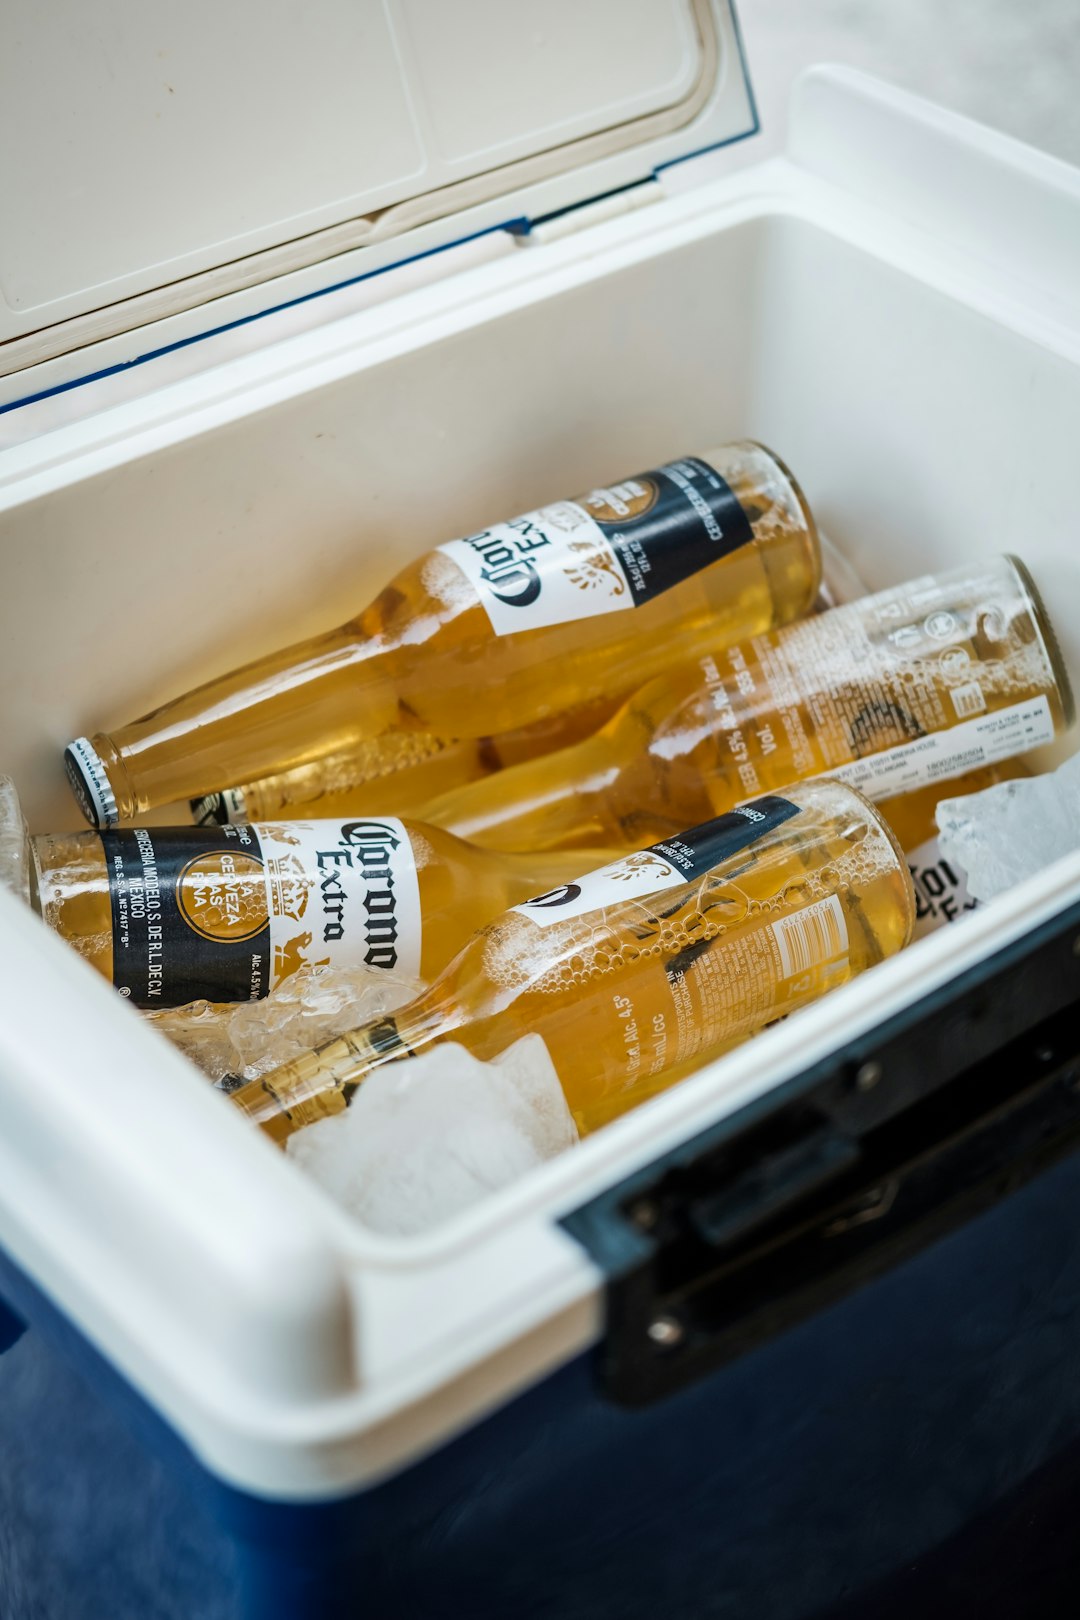  yellow labeled bottle in white plastic container cooler